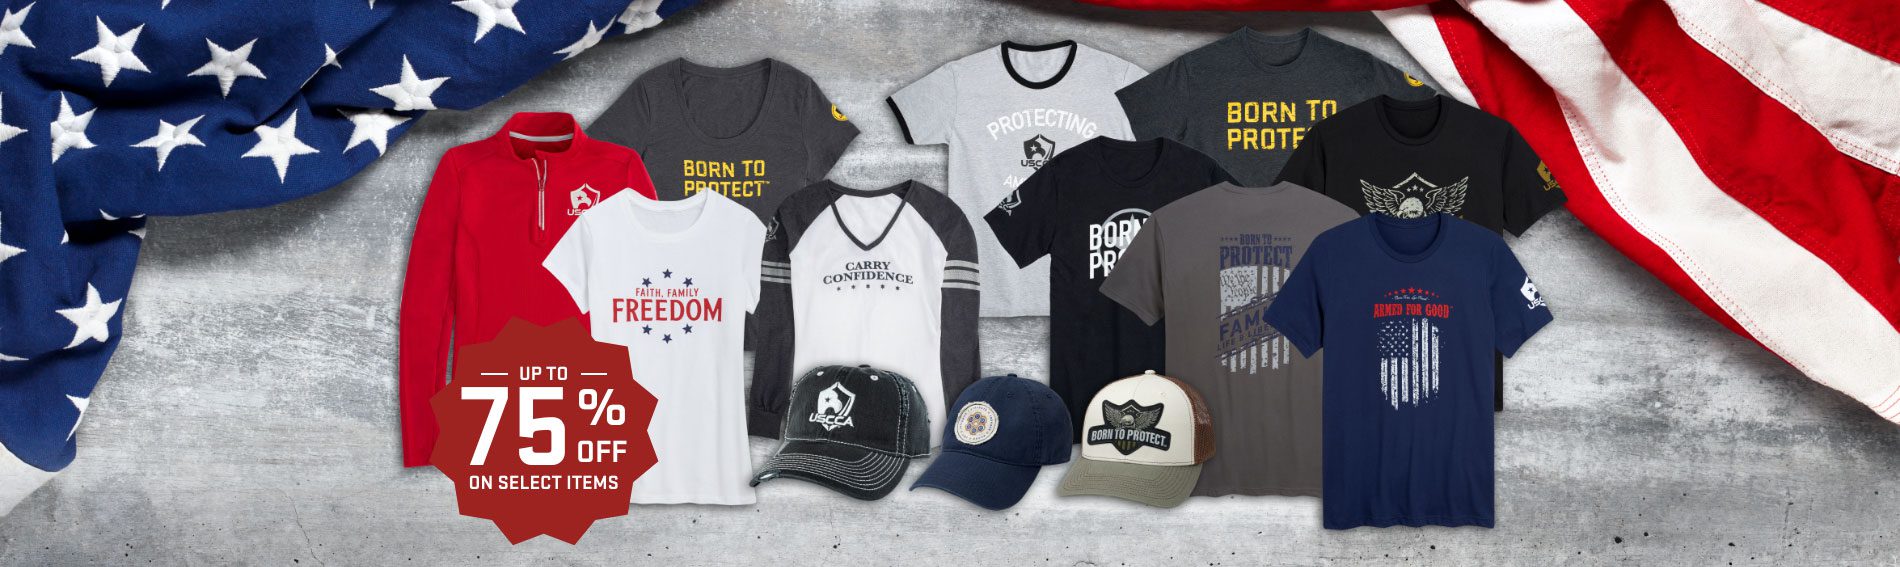 Shop USCCA Store: Apparel & CCW Gear for Responsible Gun Owners